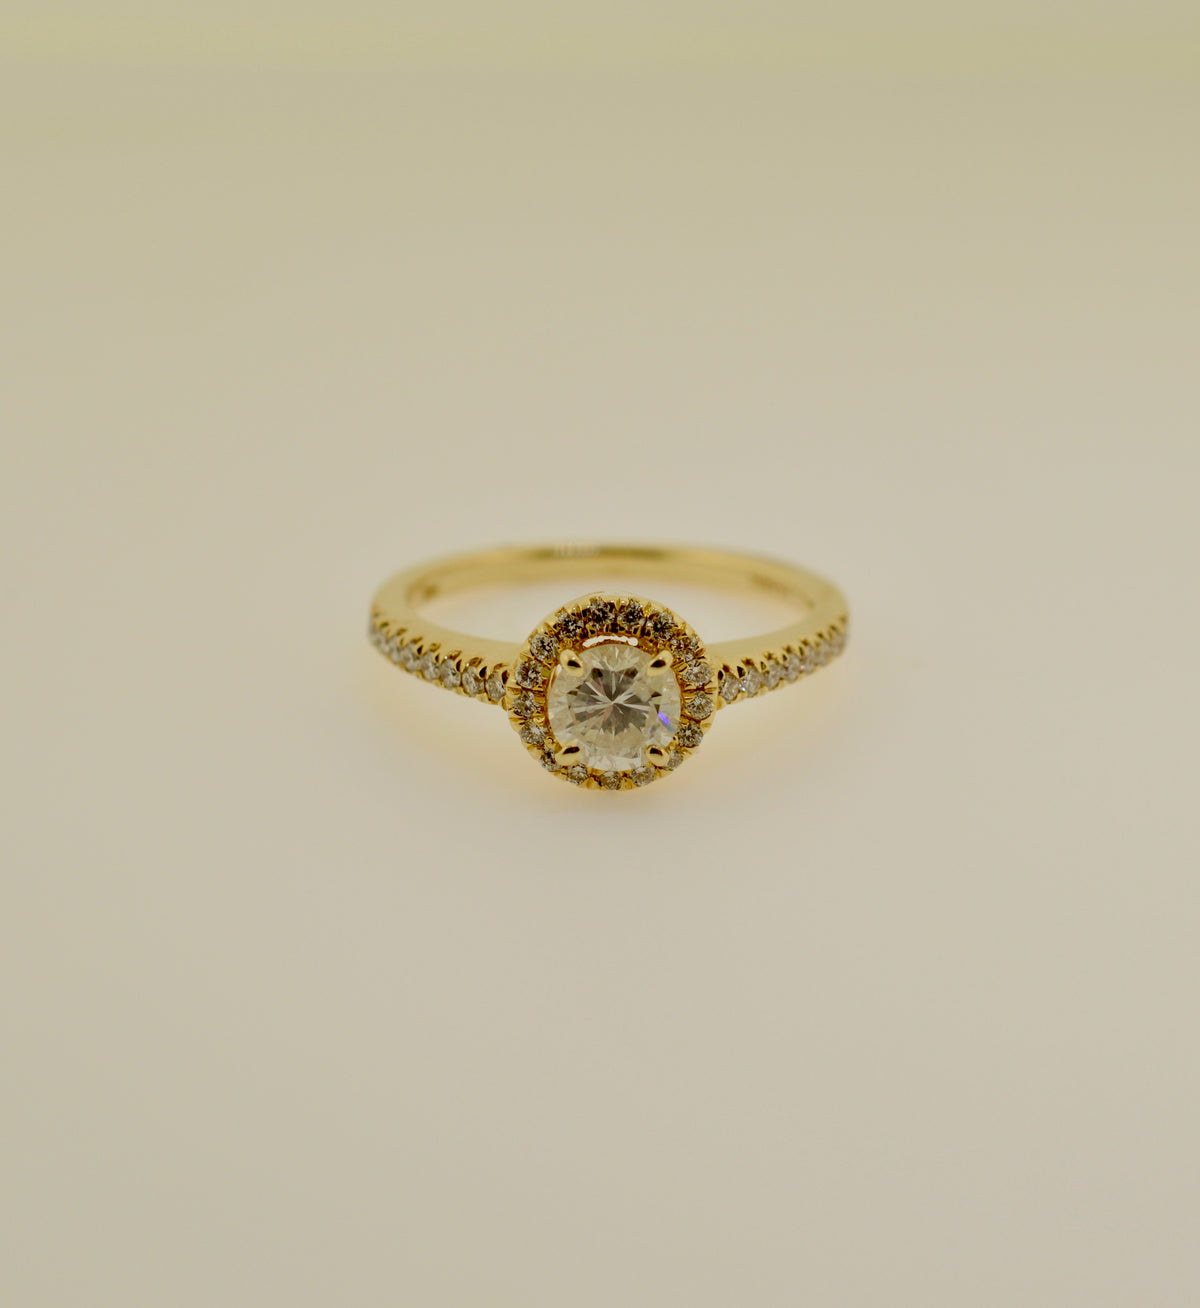 Yellow Gold Round Brilliant Cut Diamond Engagement Ring with Halo